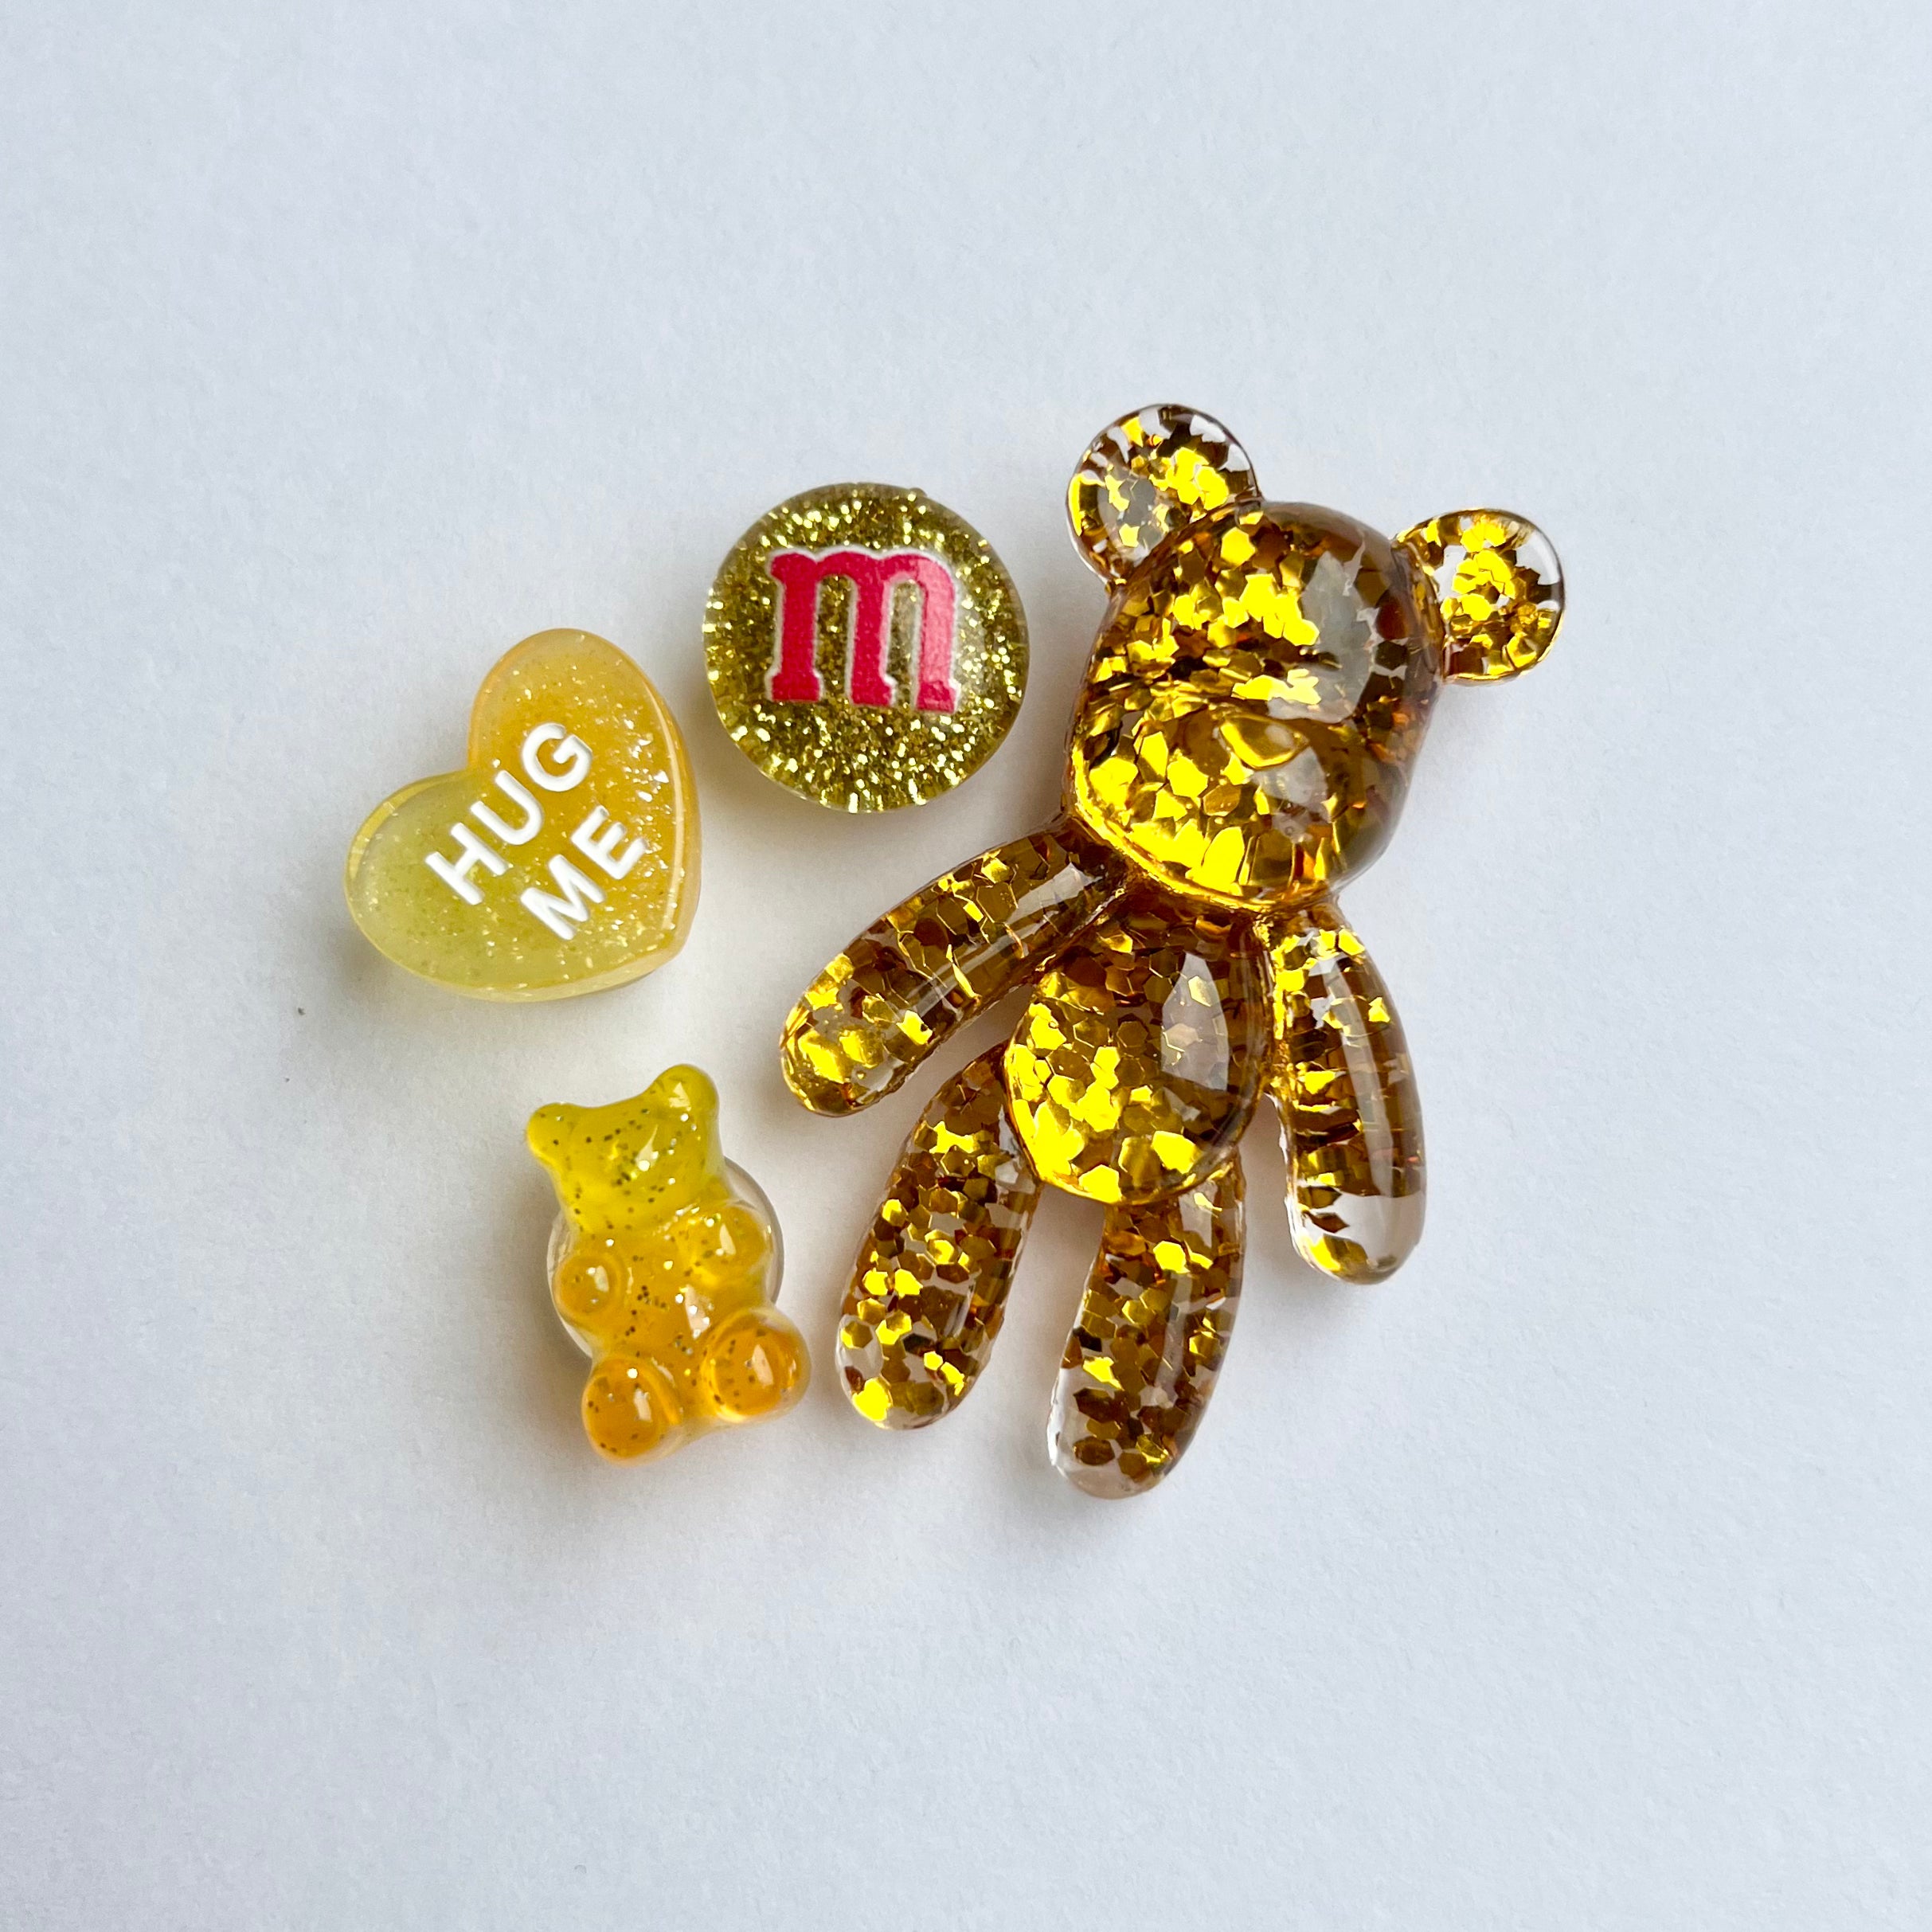 The Gold Glitter Charms Pack